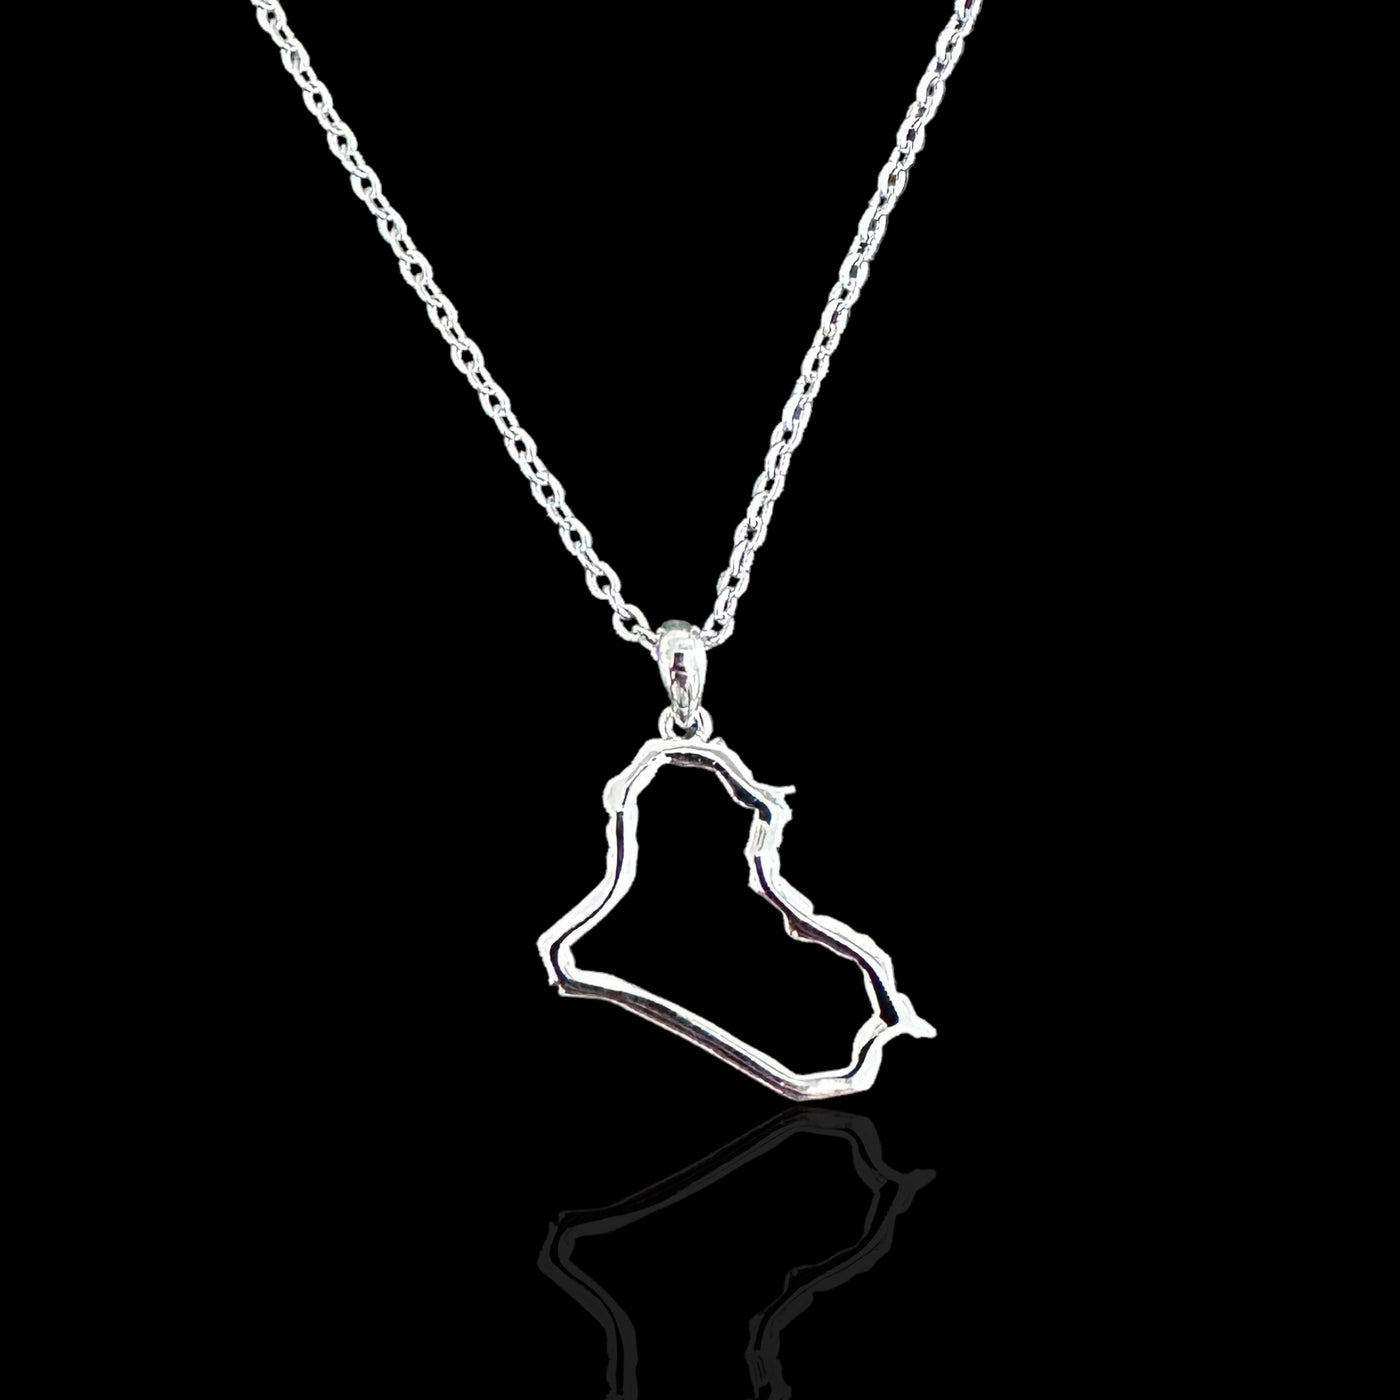 Sterling Silver Iraq Map Outline Necklace - Available in 3 Colors